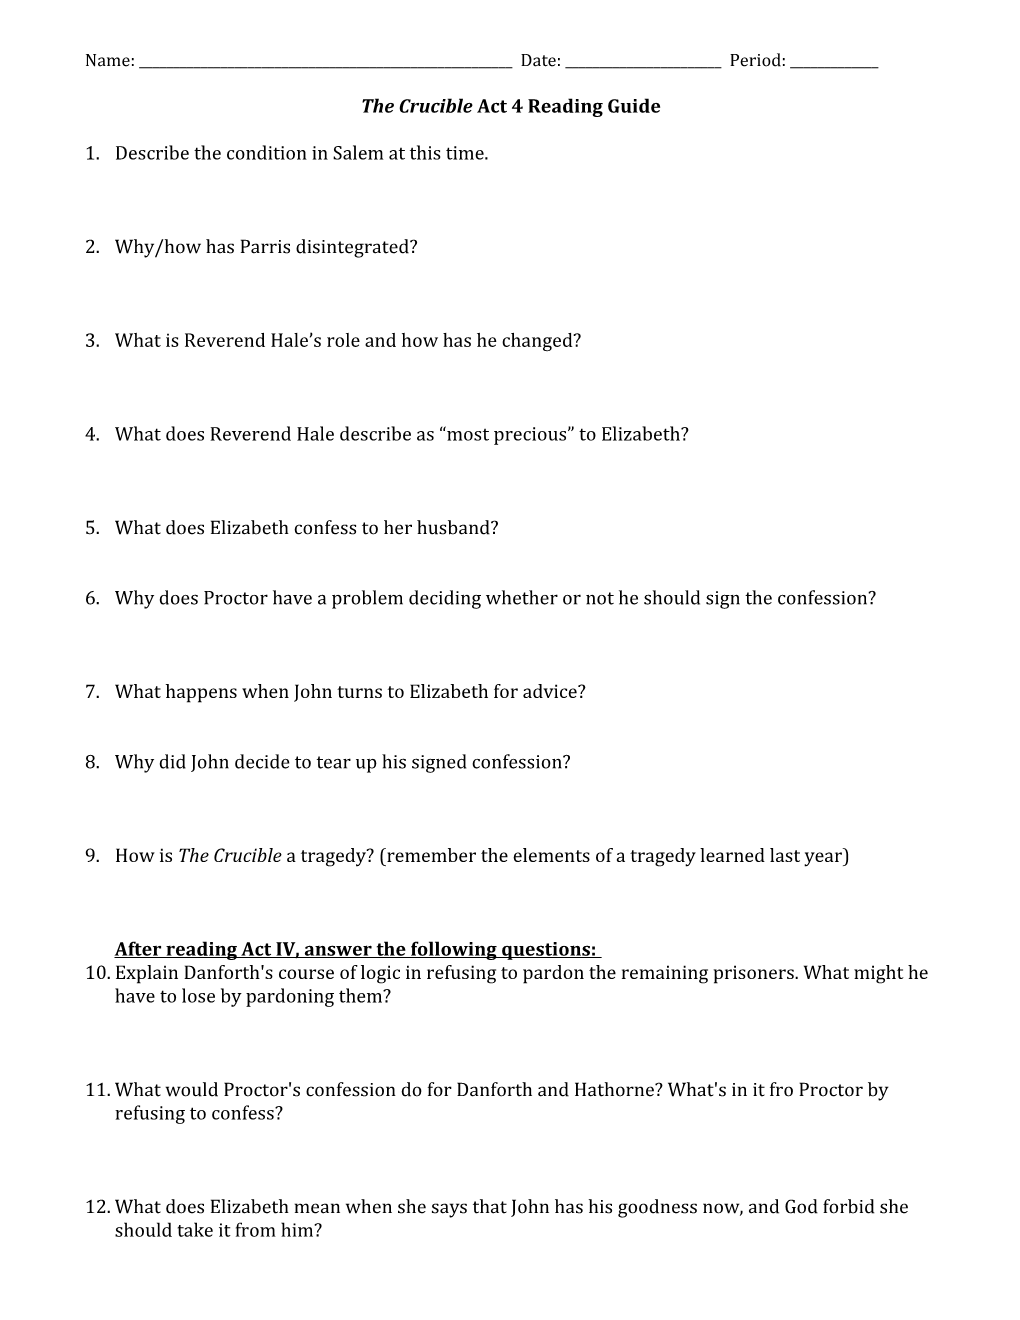 The Crucible Acts 2, 3, 4 Discussion Questions